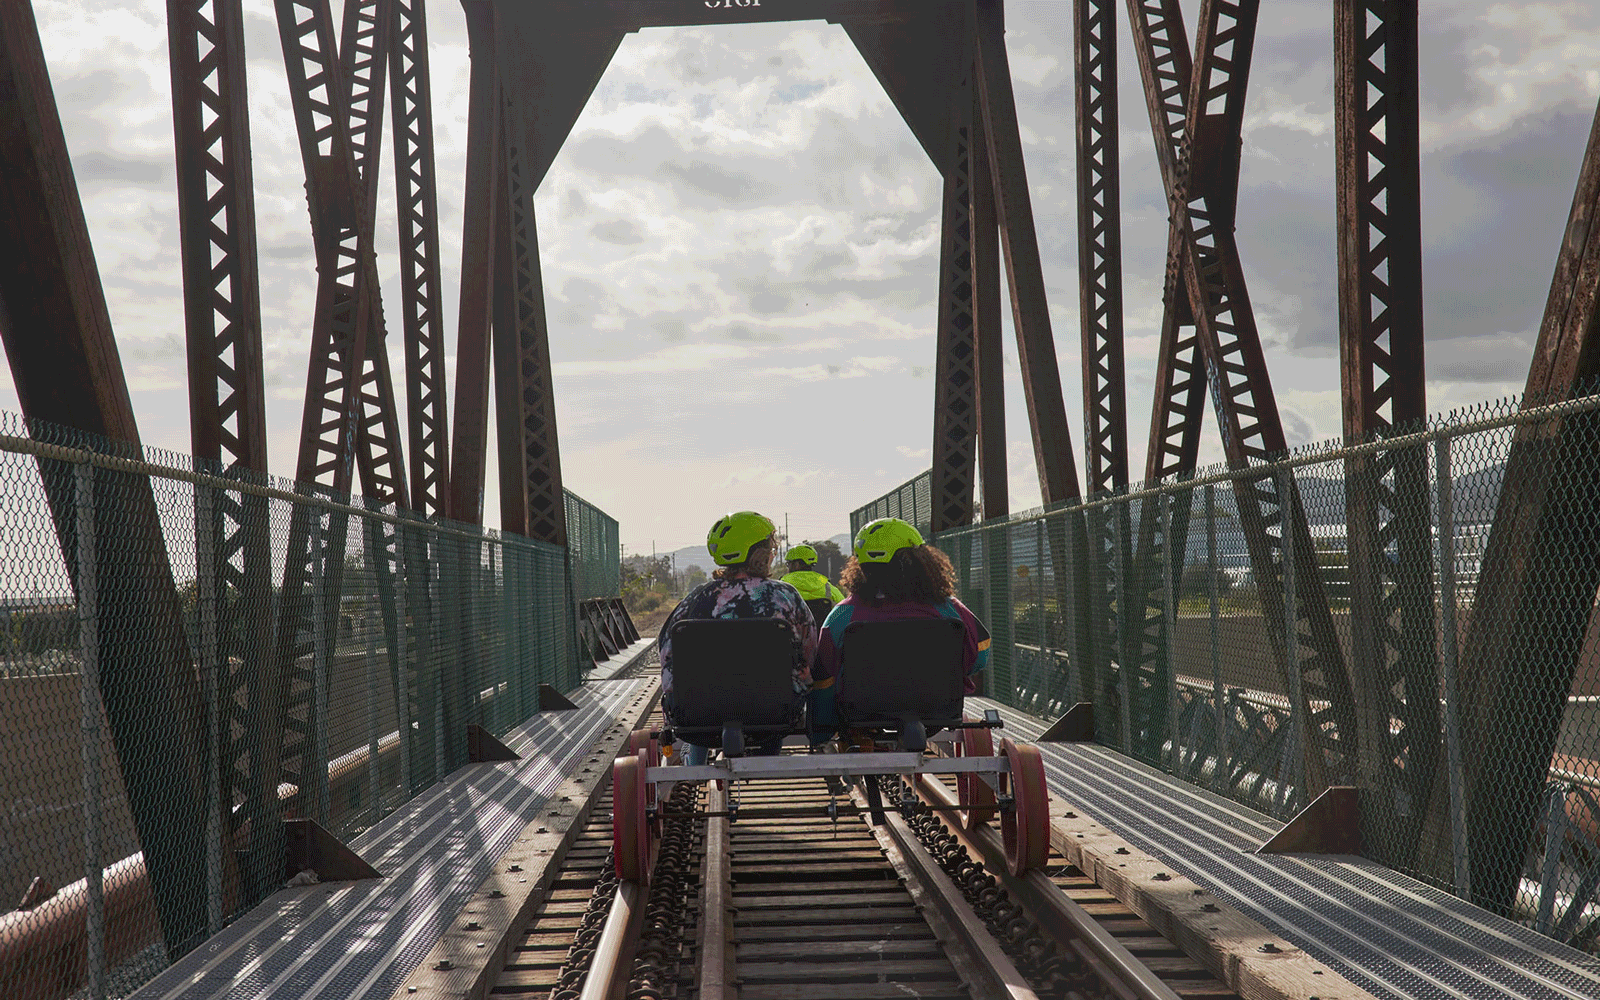 A gif of two people, viewed from behind, railbiking across a bridge.